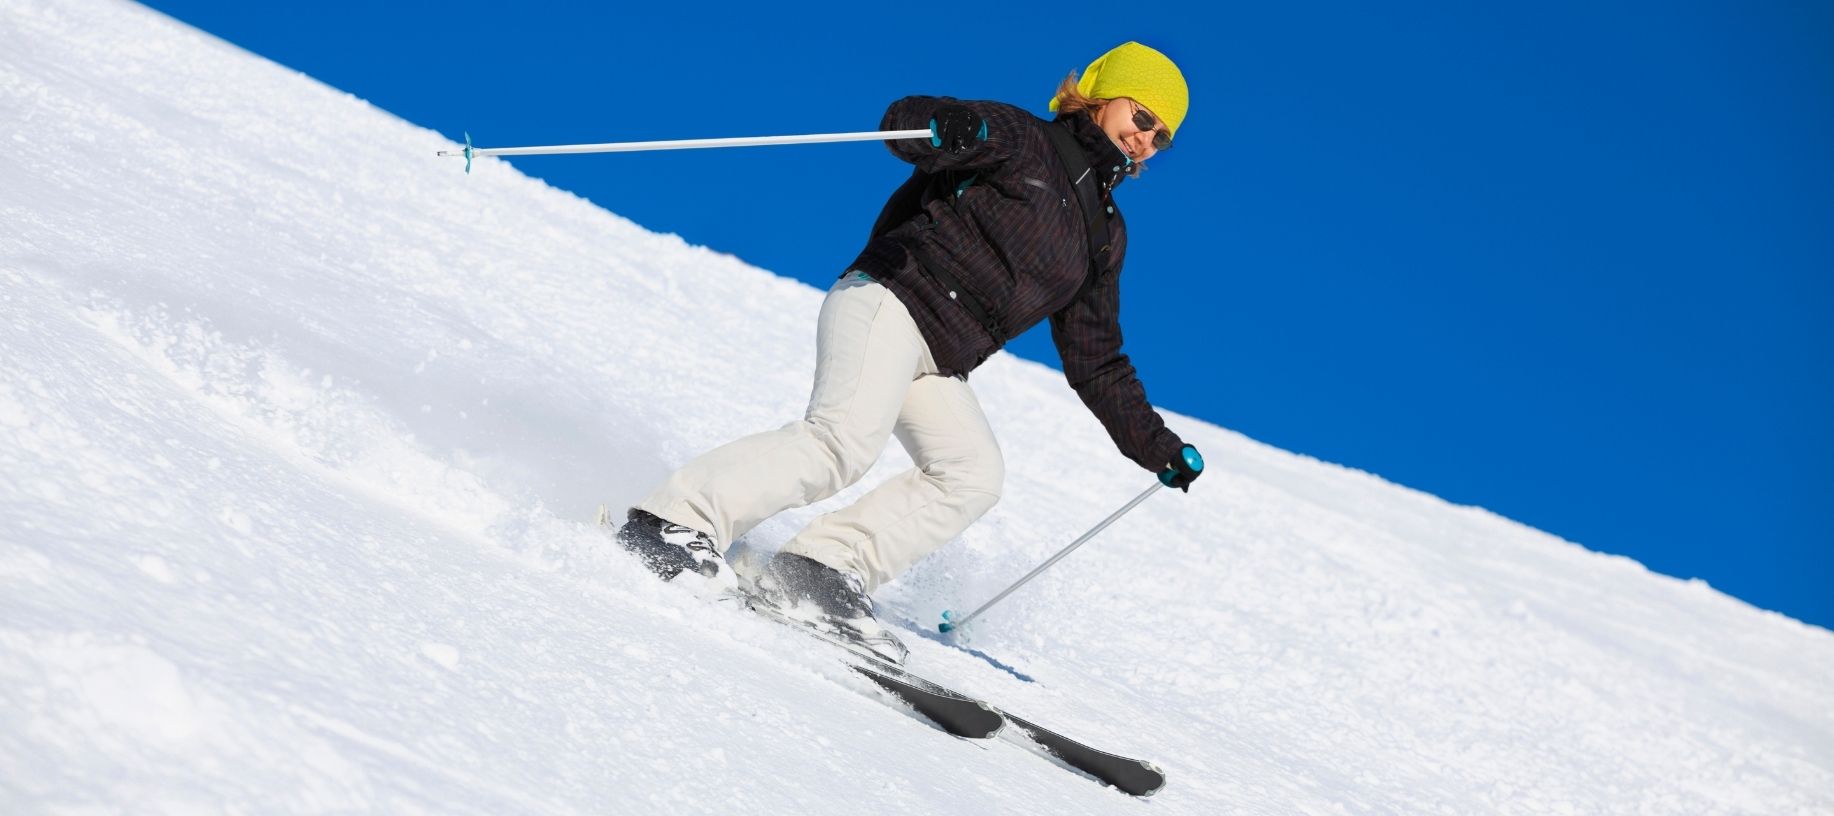 Woman snow skiing down a hill amidst blue skies